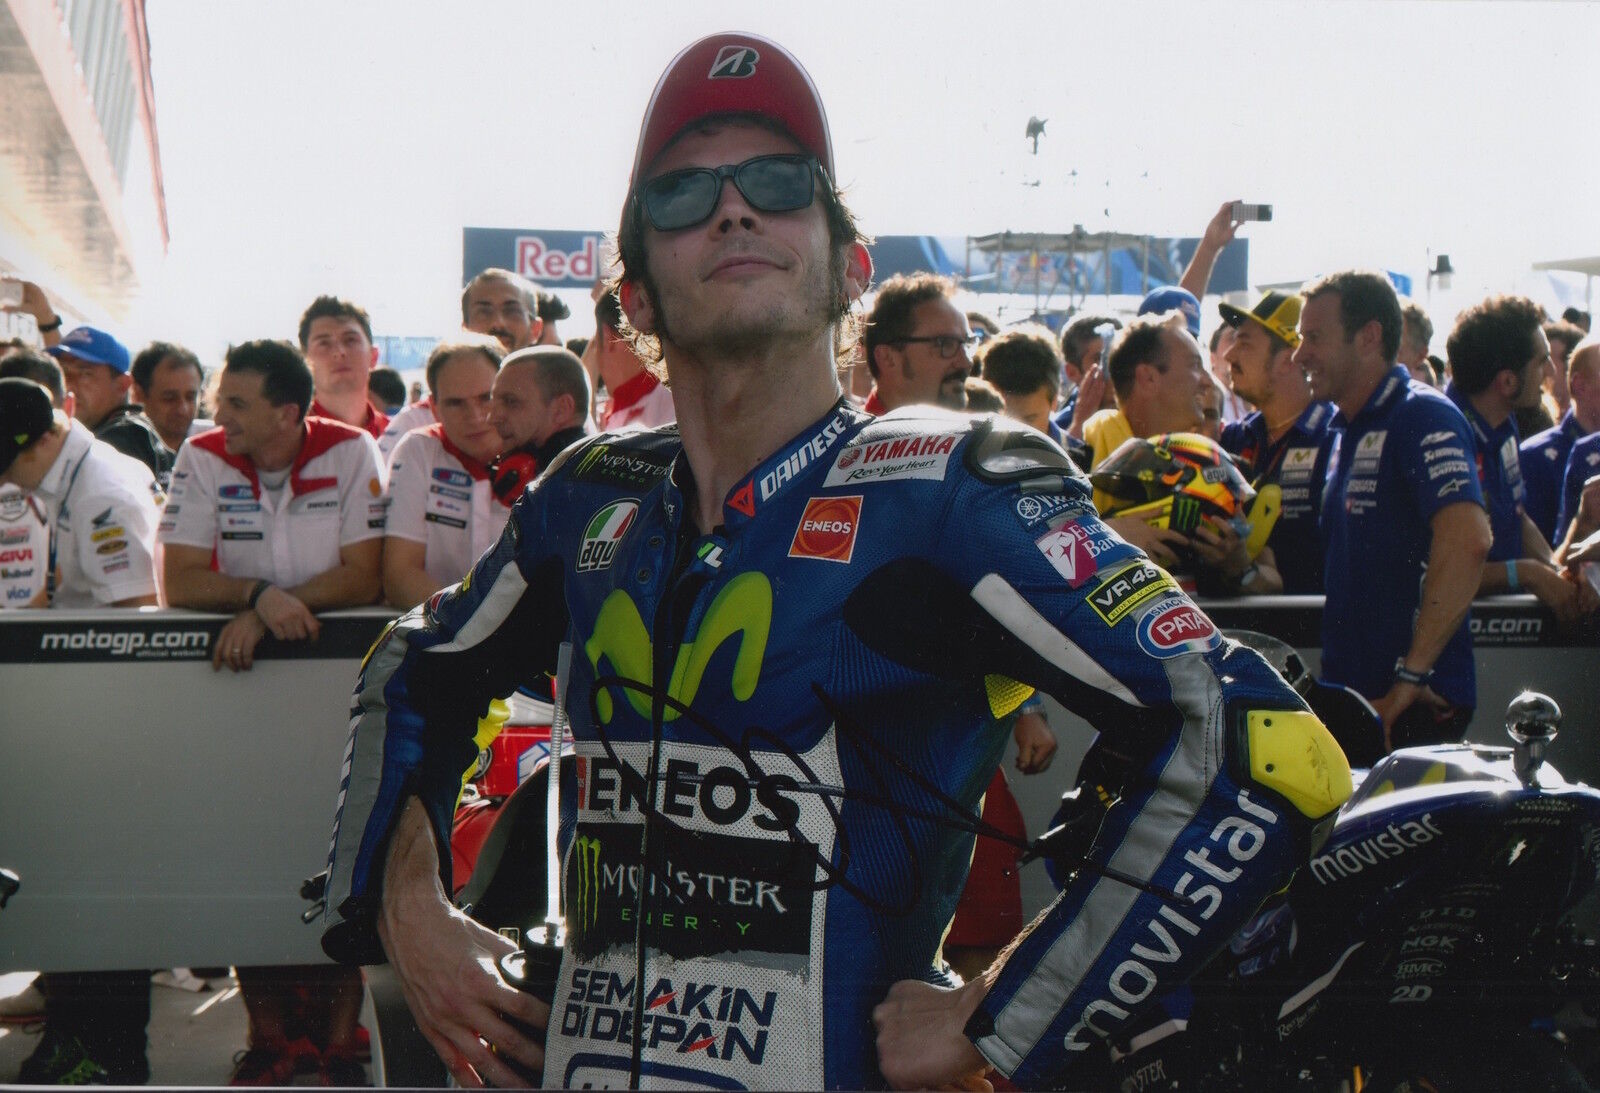 VALENTINO ROSSI HAND SIGNED YAMAHA 12X8 Photo Poster painting MOTOGP AUTOGRAPH PROOF 15.